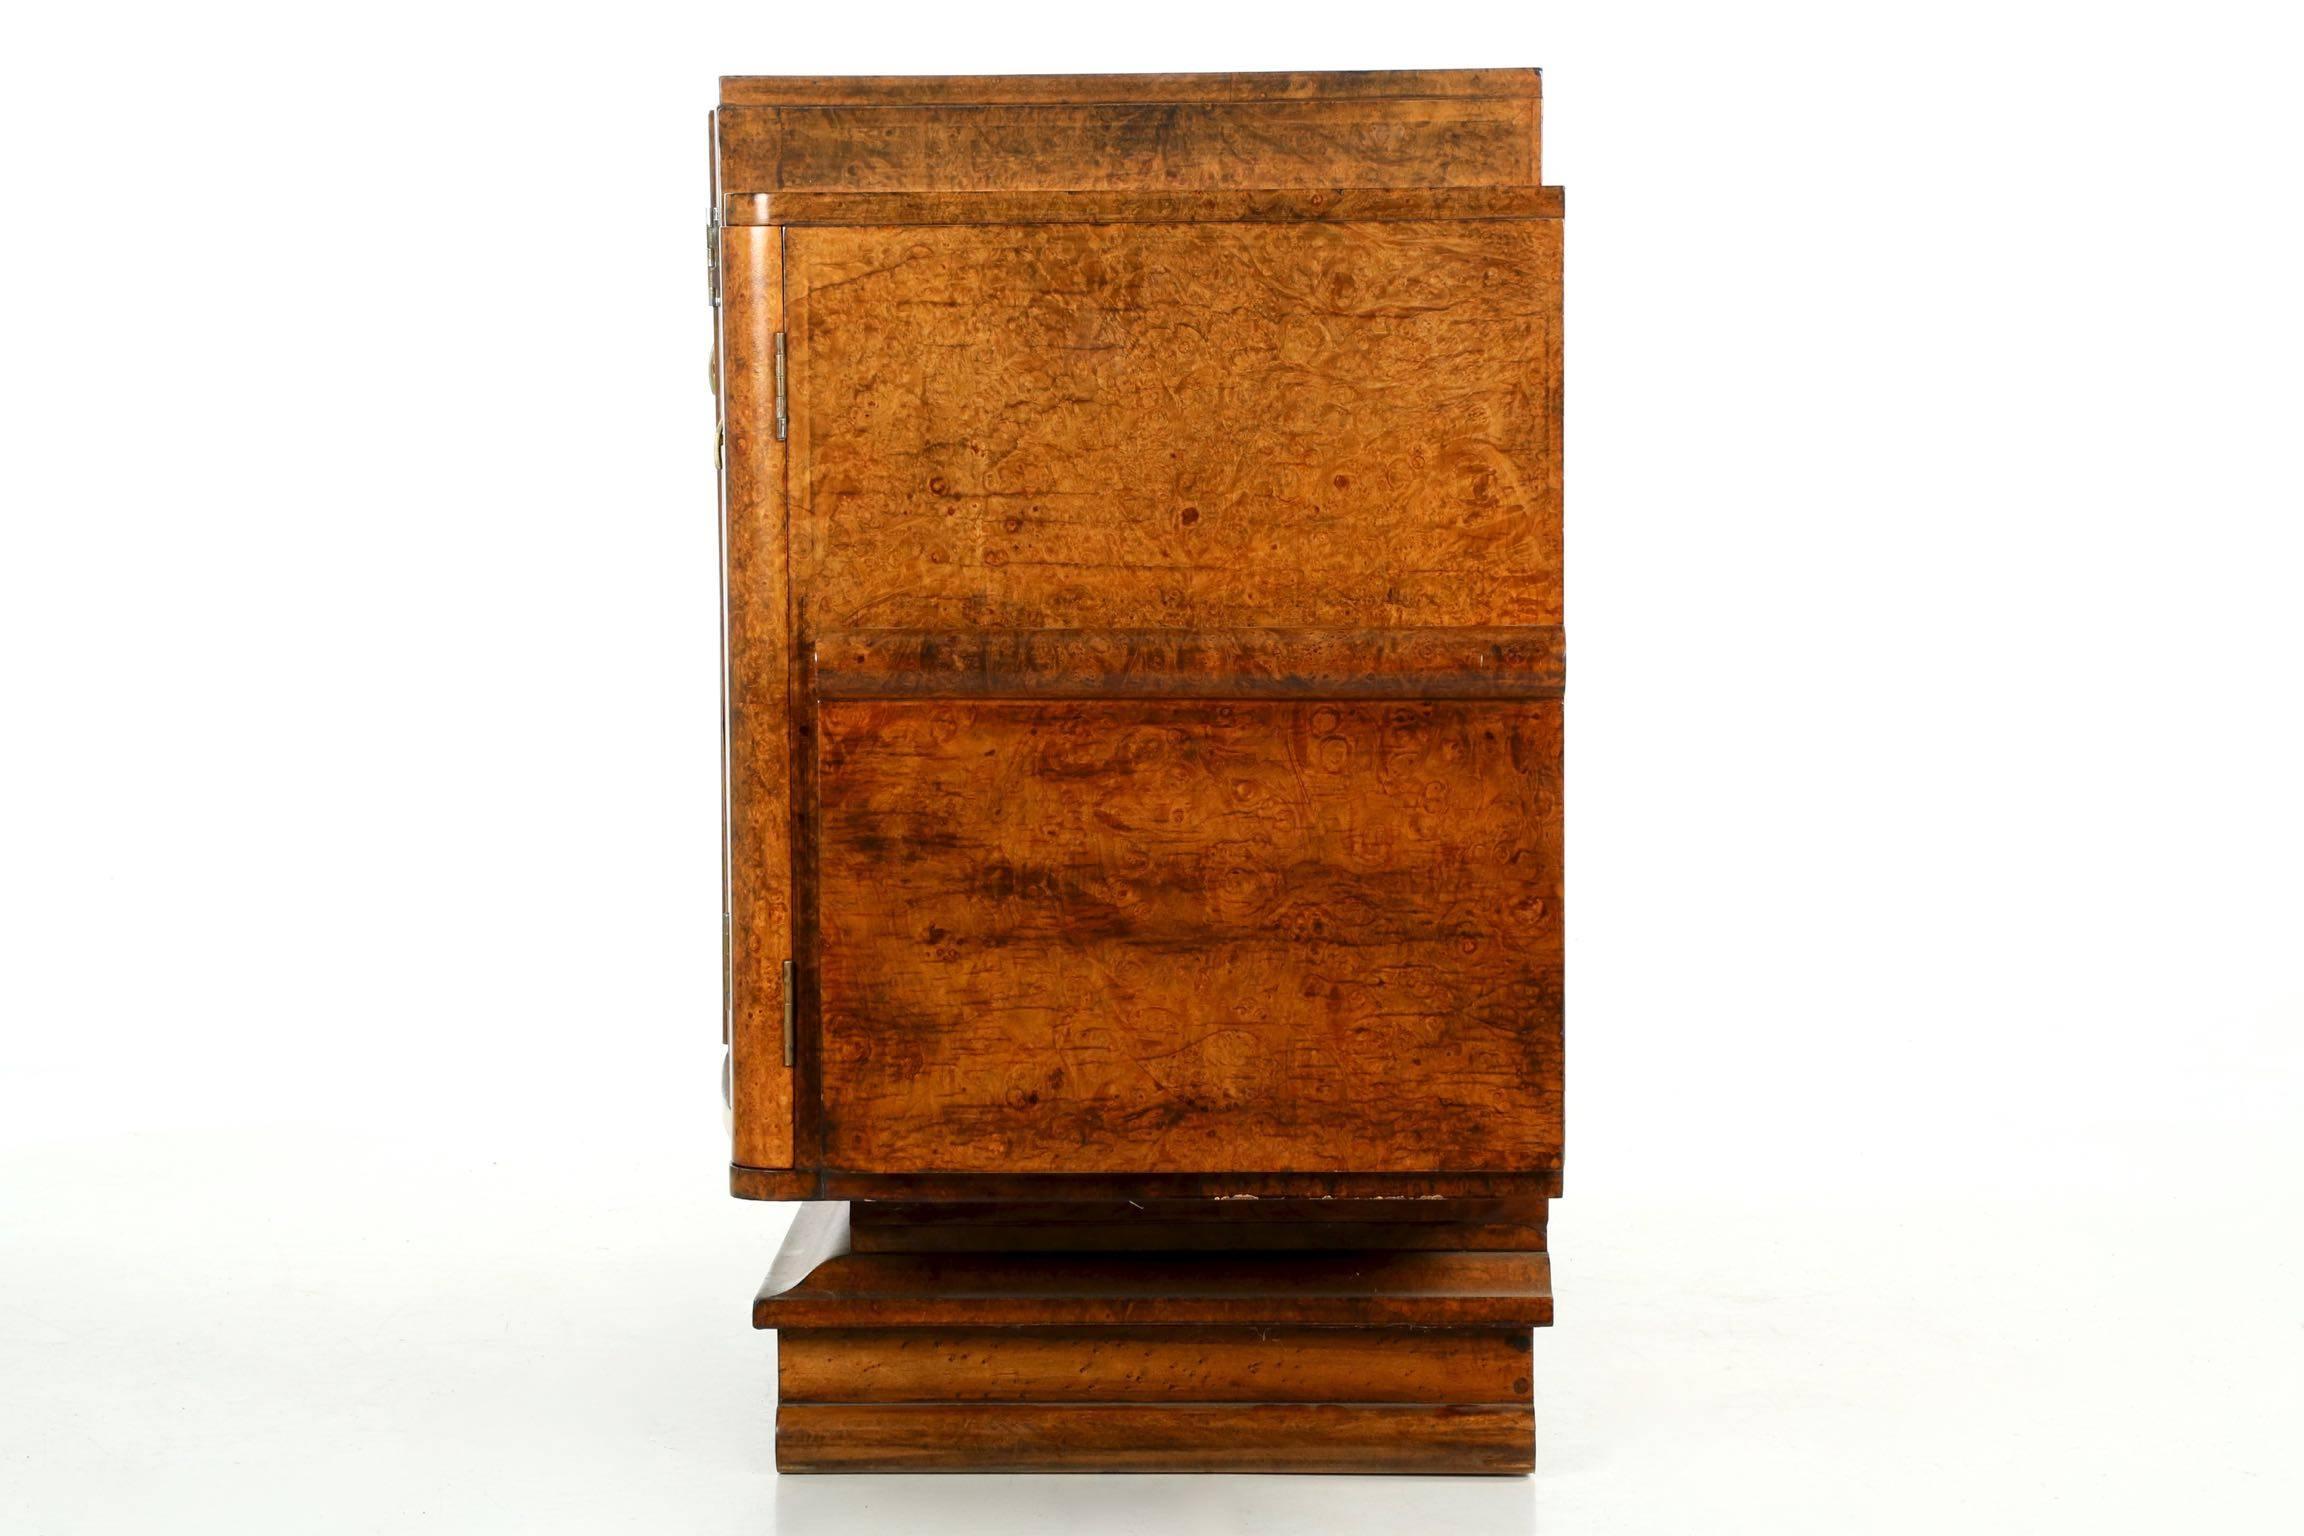 European Art Deco Amboyna Veneered Stepped Console Cabinet with Drawers, circa 1930